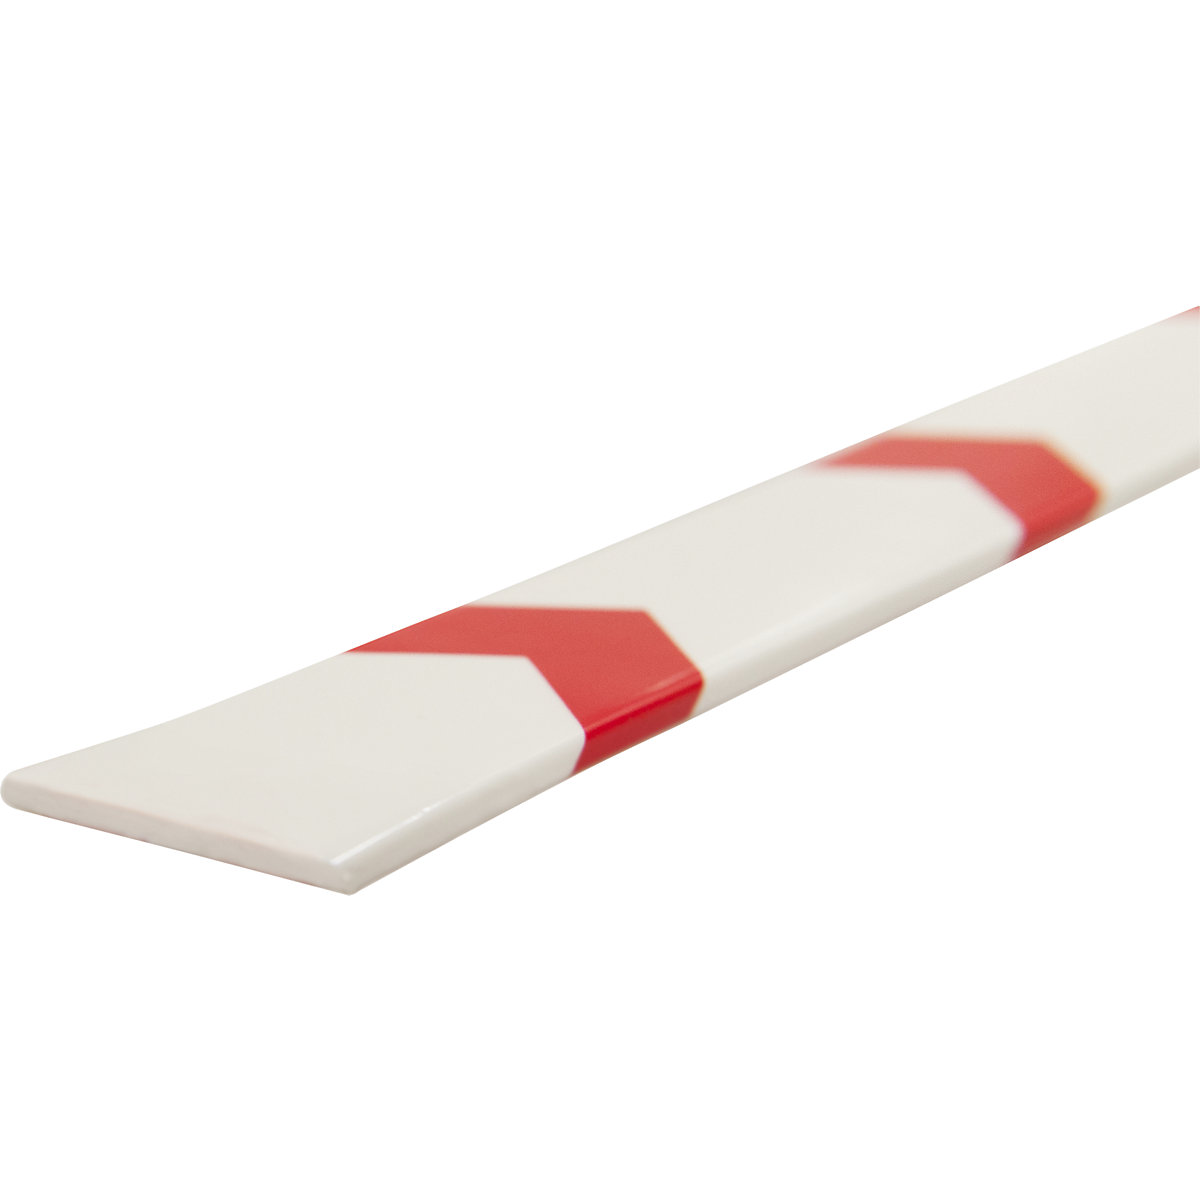 ONEWAY Knuffi® guidance system – SHG, 1 m length, reusable, red / white-3